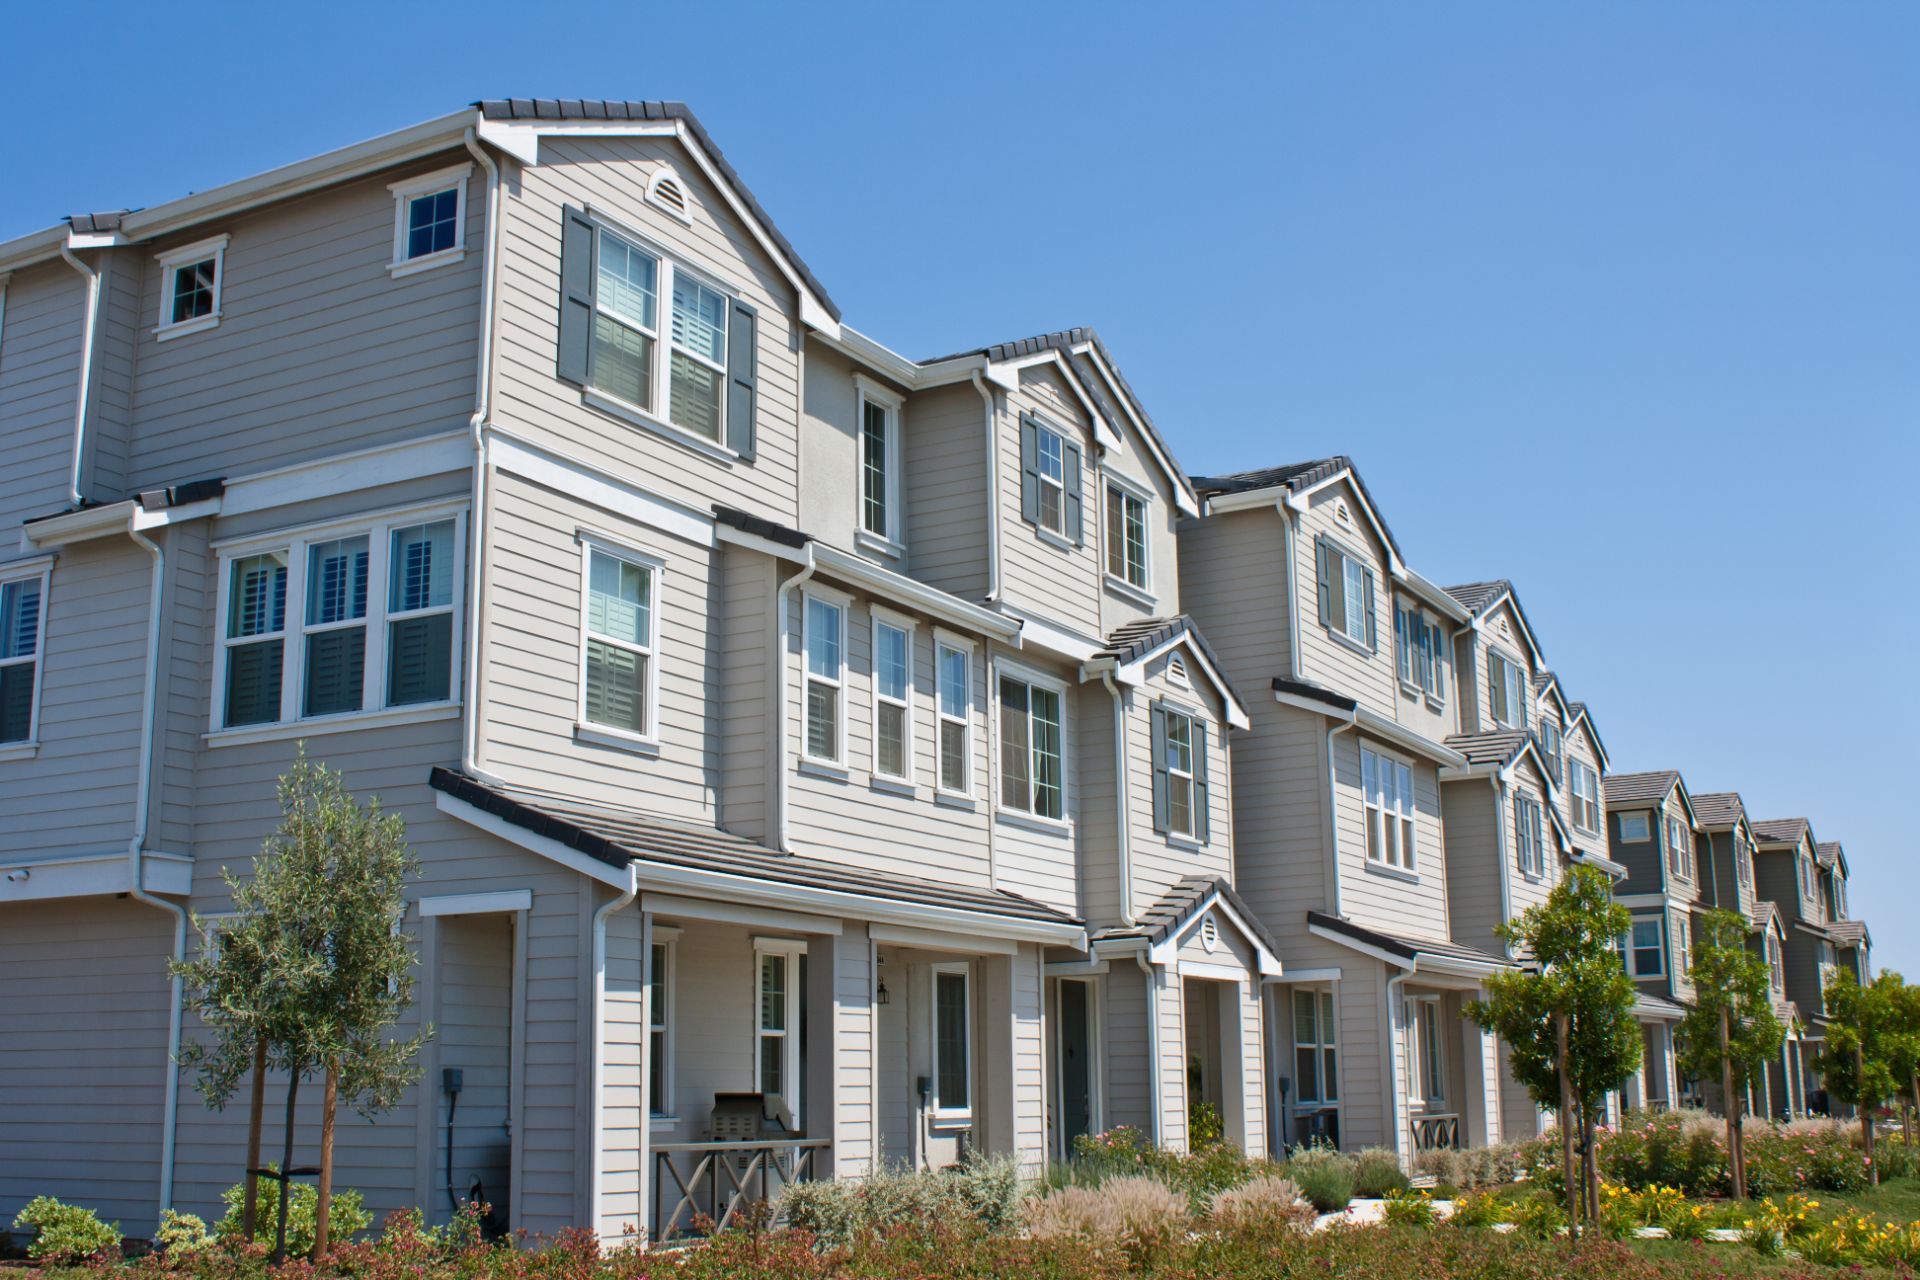 A multifamily dwelling